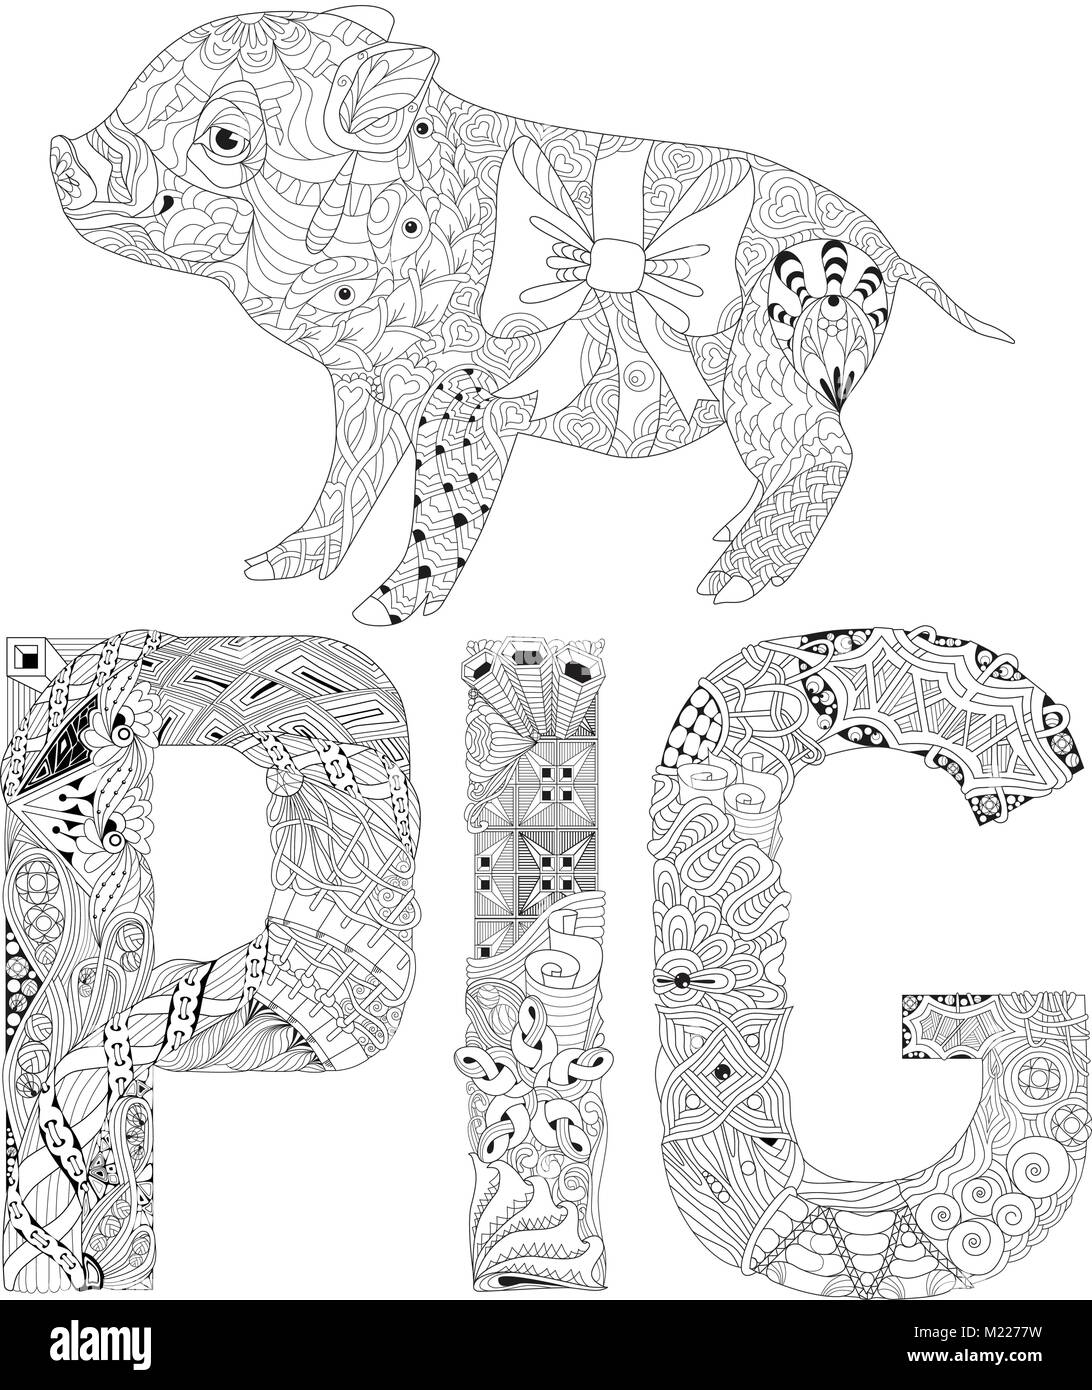 Zentangle illustration with pig. Zen tangle or doodle piglet. Coloring book domestic animal. Stock Vector